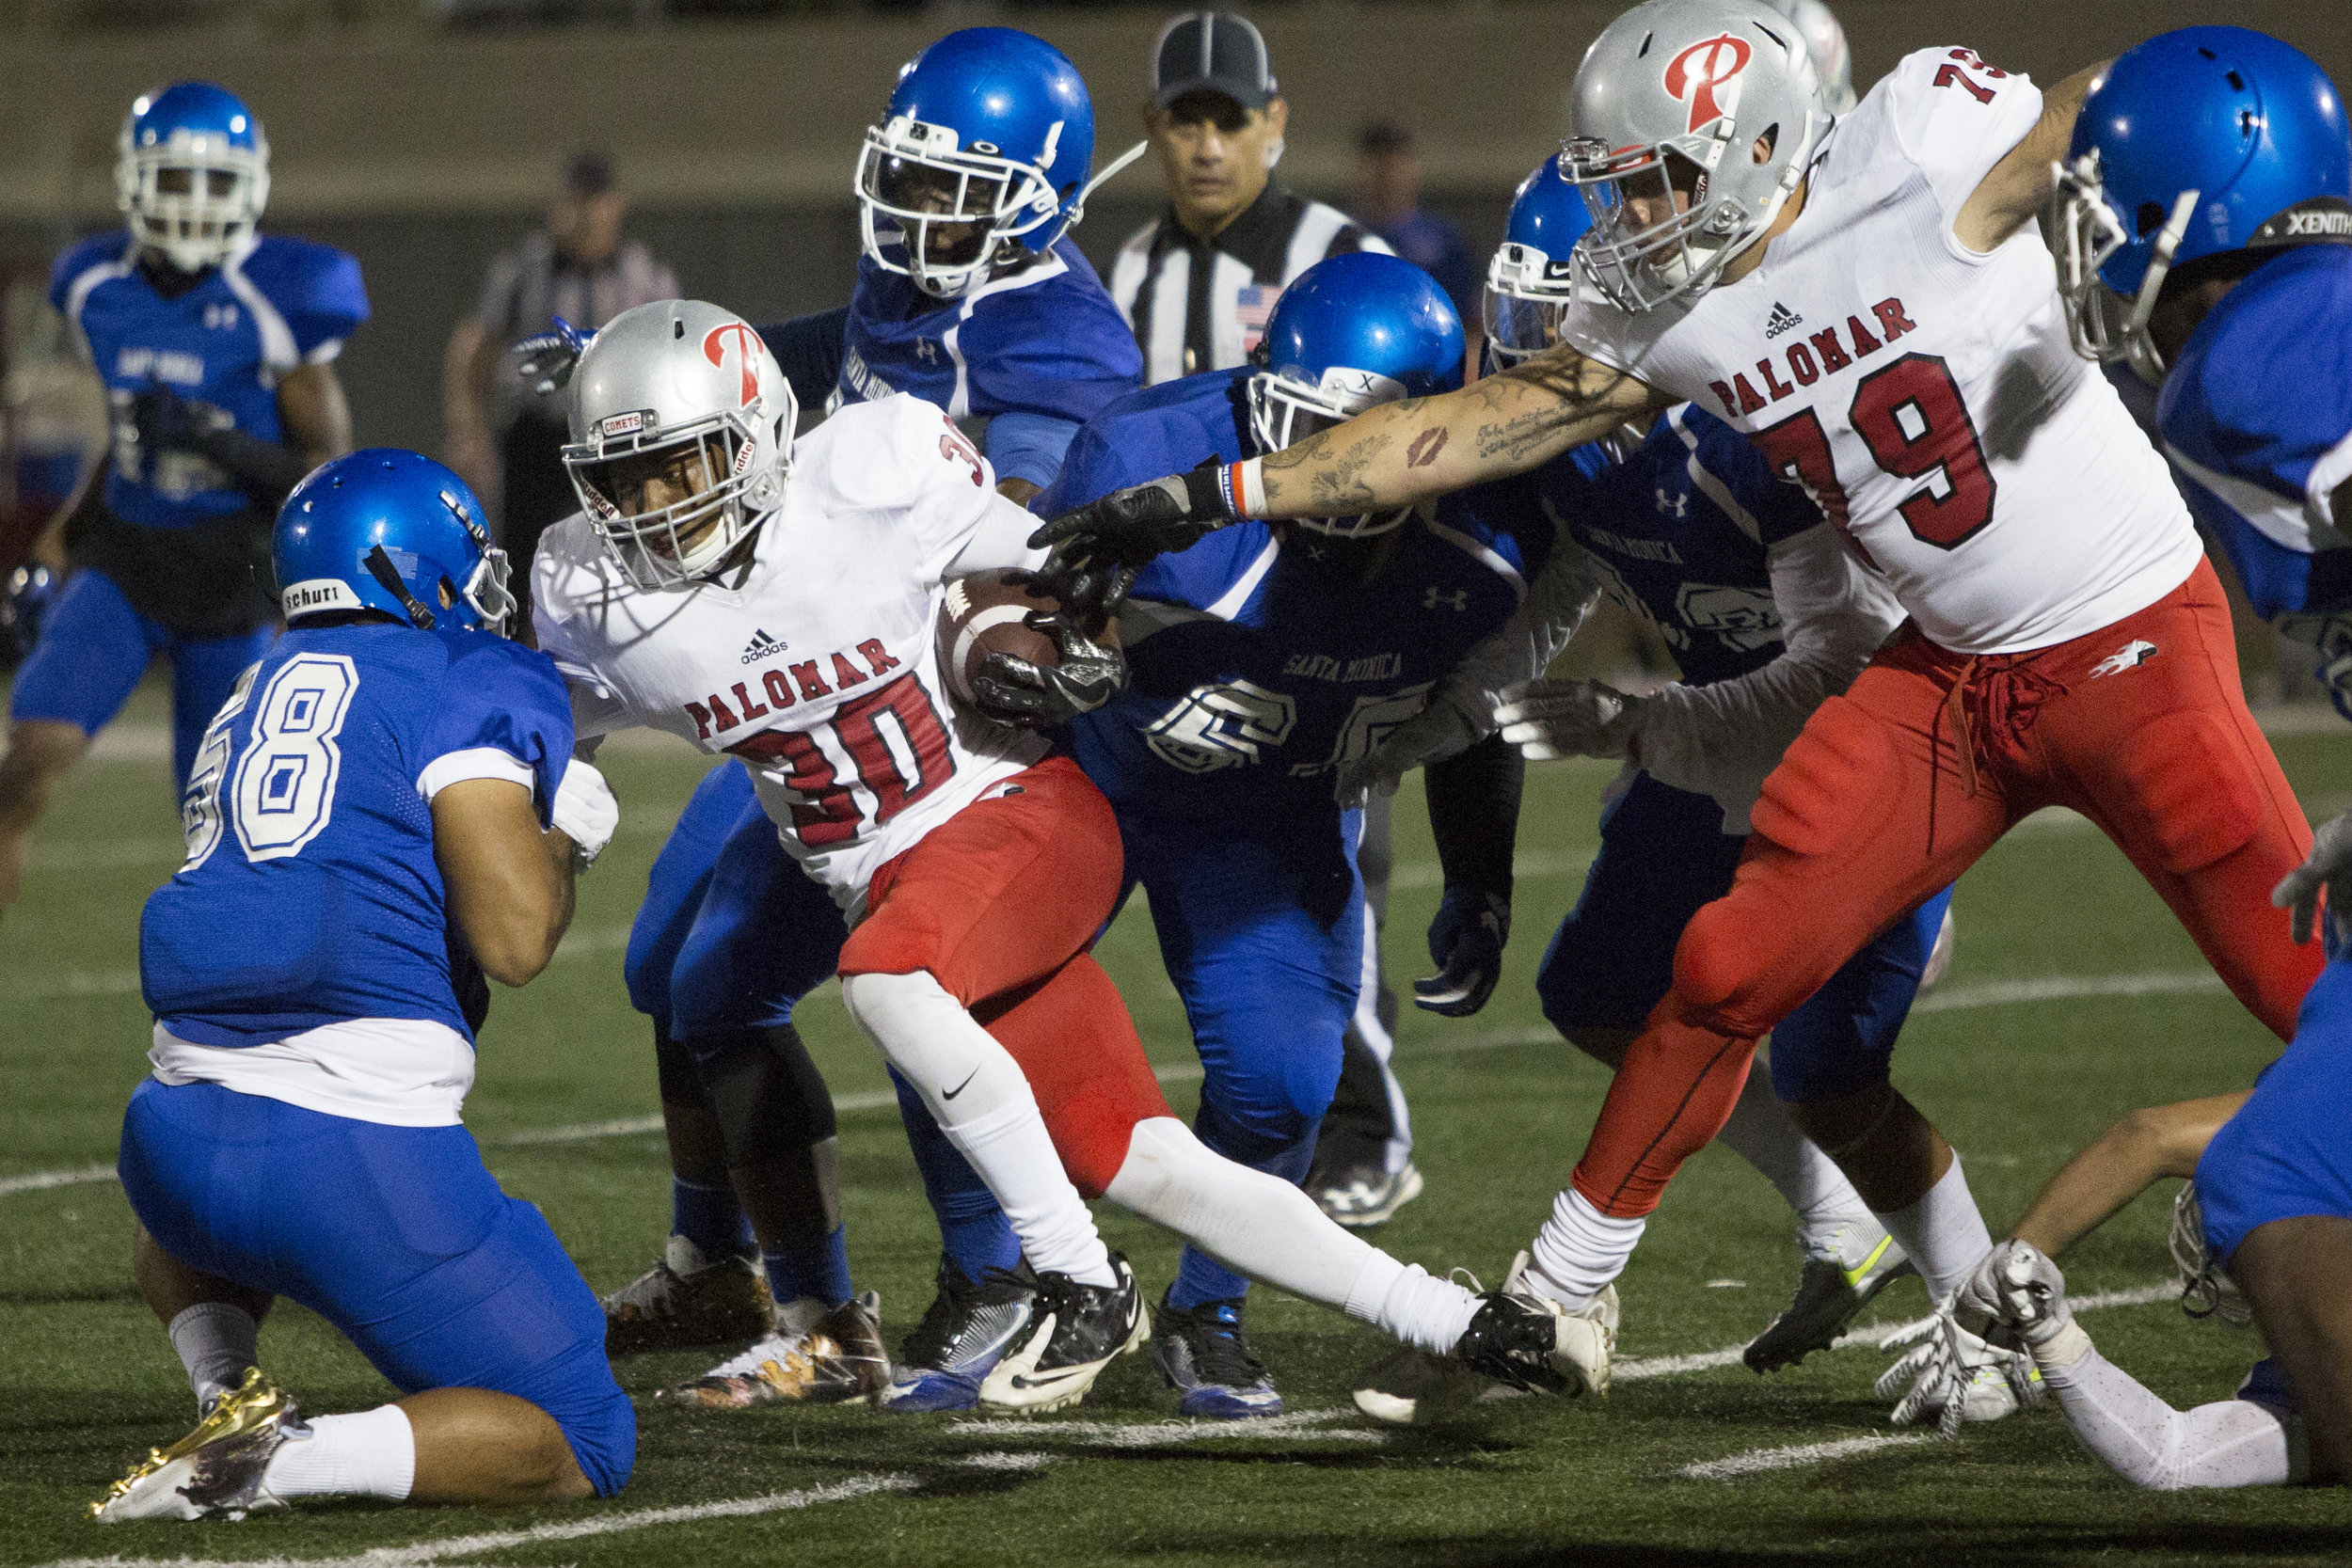  Palomar College Comet Edwin Morton (RB)(30)(left) struggles to break free from a tackle by the Santa Monica College Corsairs on September 10, 2017 on the Corsair Field at Santa Monica College in Santa Monica, California. The Corsairs lose to the Com